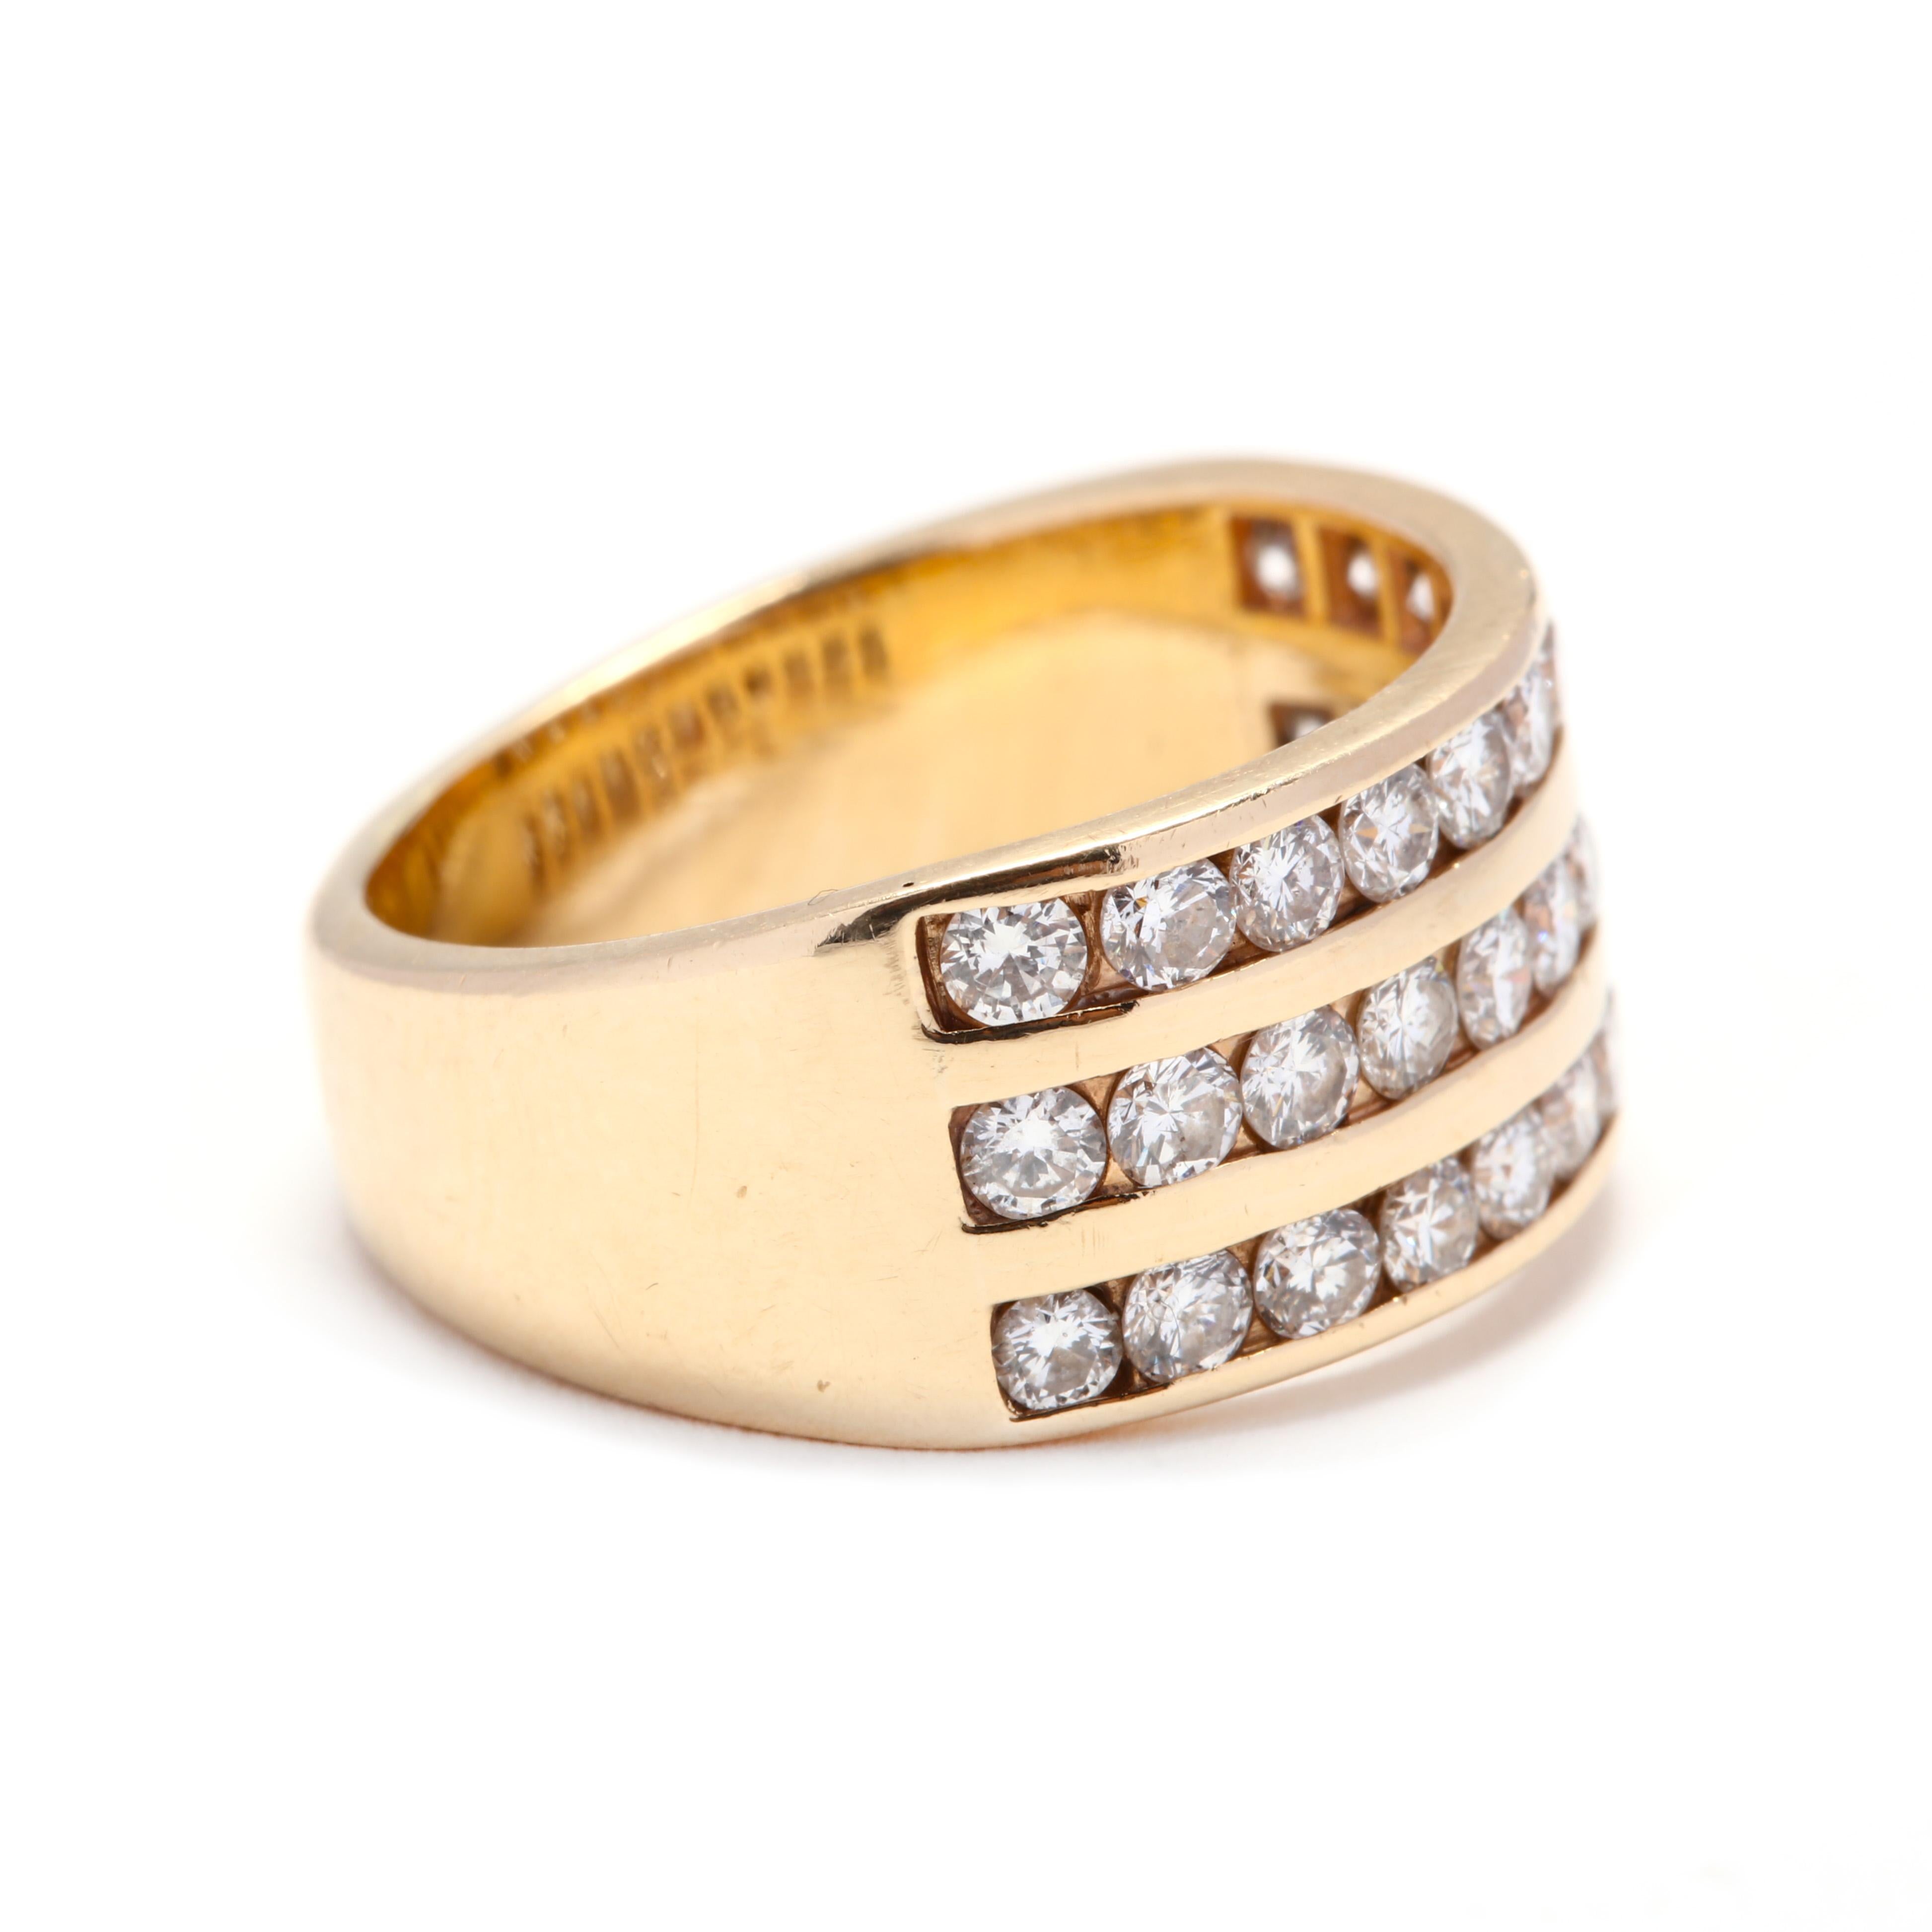 A vintage 14 karat yellow gold diamond ring. This ring features a three row design with channel set round brilliant cut diamonds weighing approximately 1.55 total carats

Stones:
- diamonds, 33 stones
- round brilliant cut
- 2.3 - 2.4 mm
-